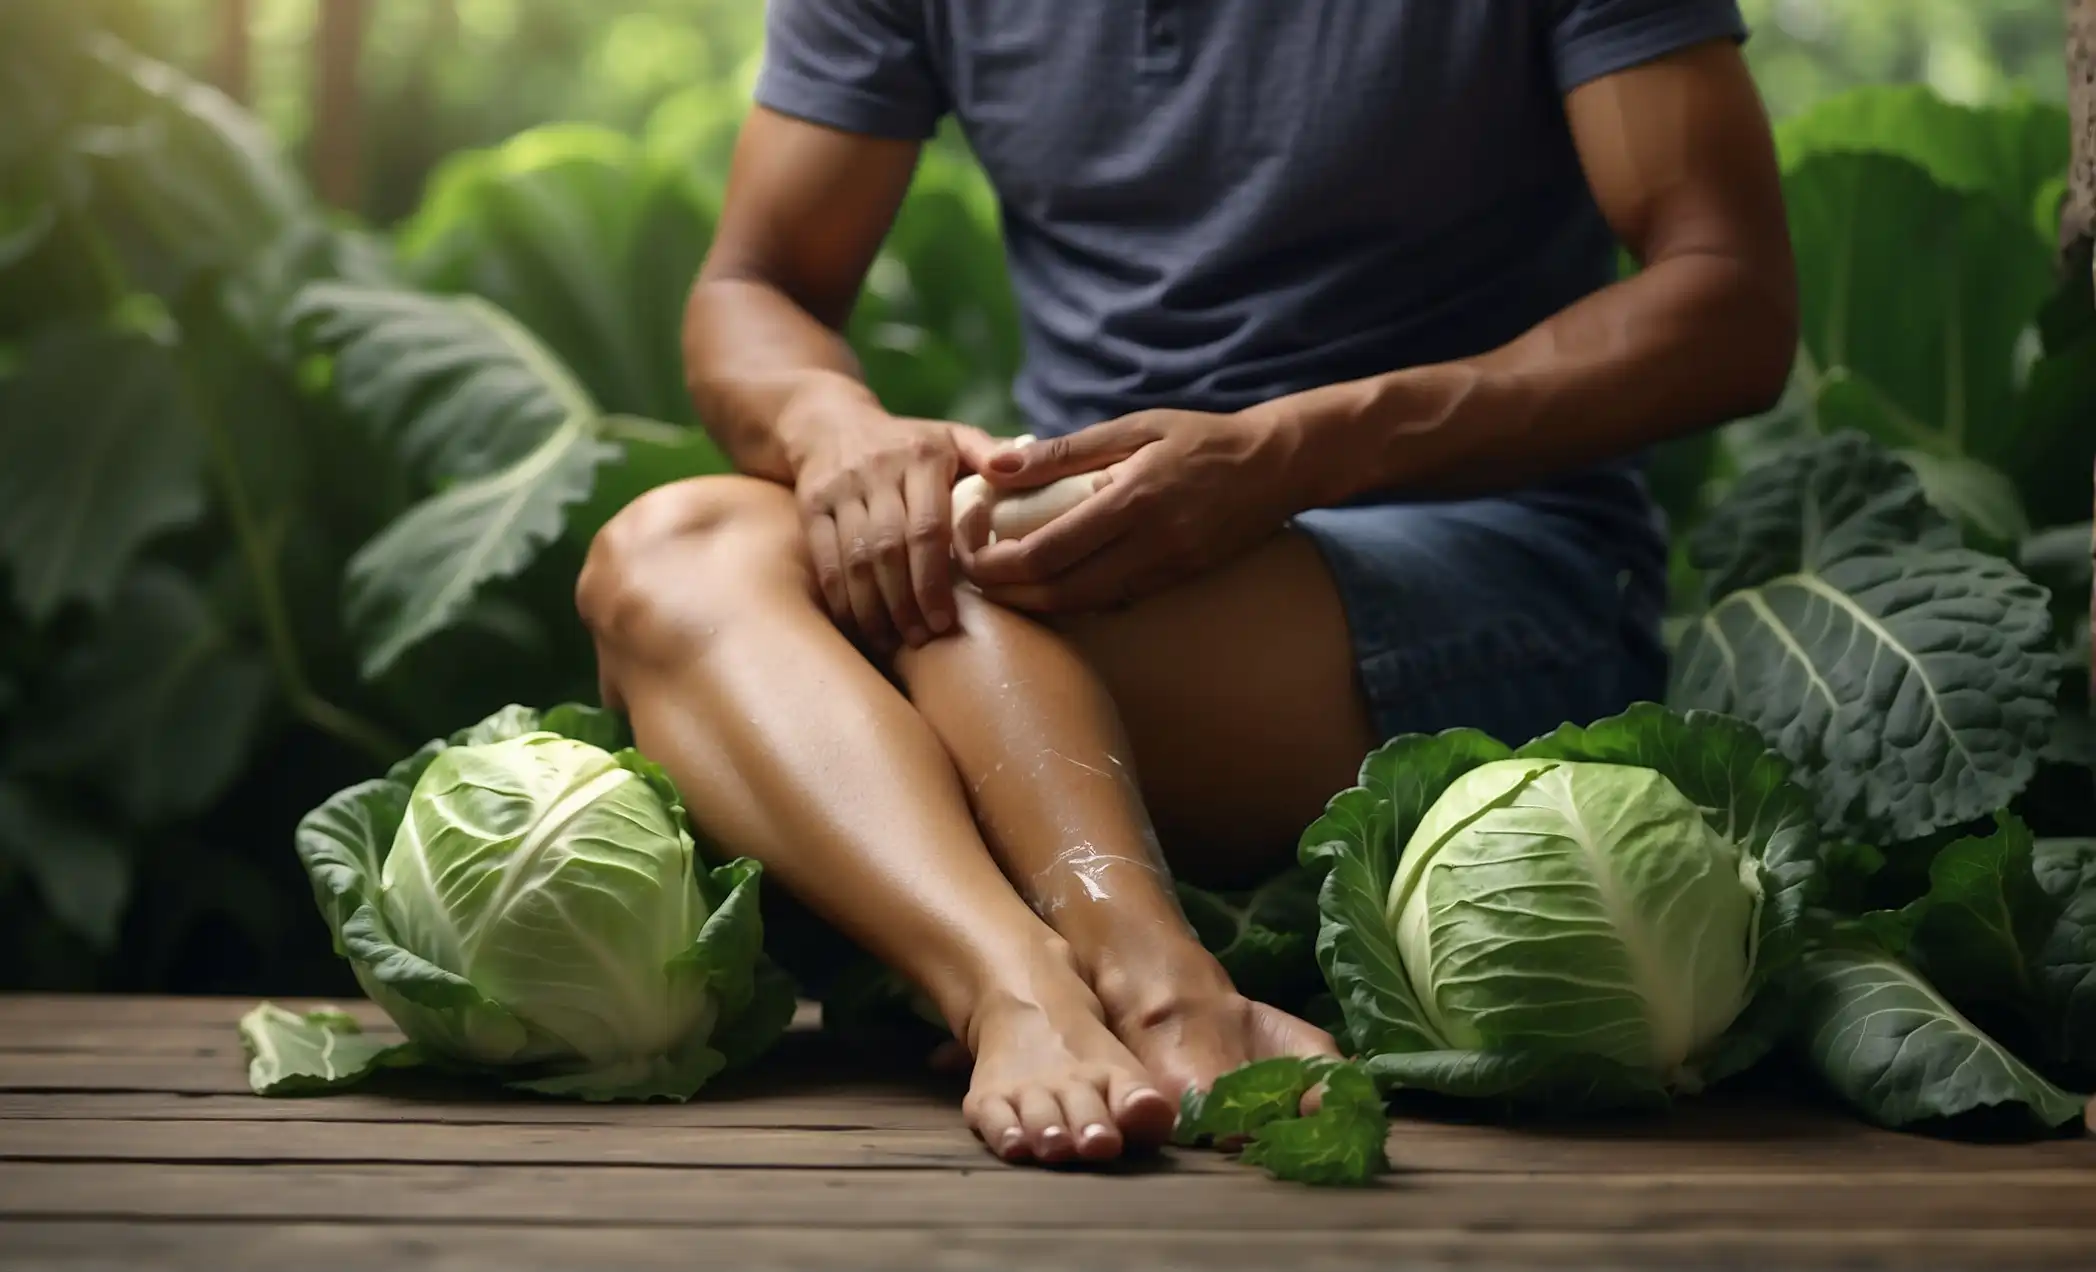 How to Use Cabbage Leaves for Knee Pain